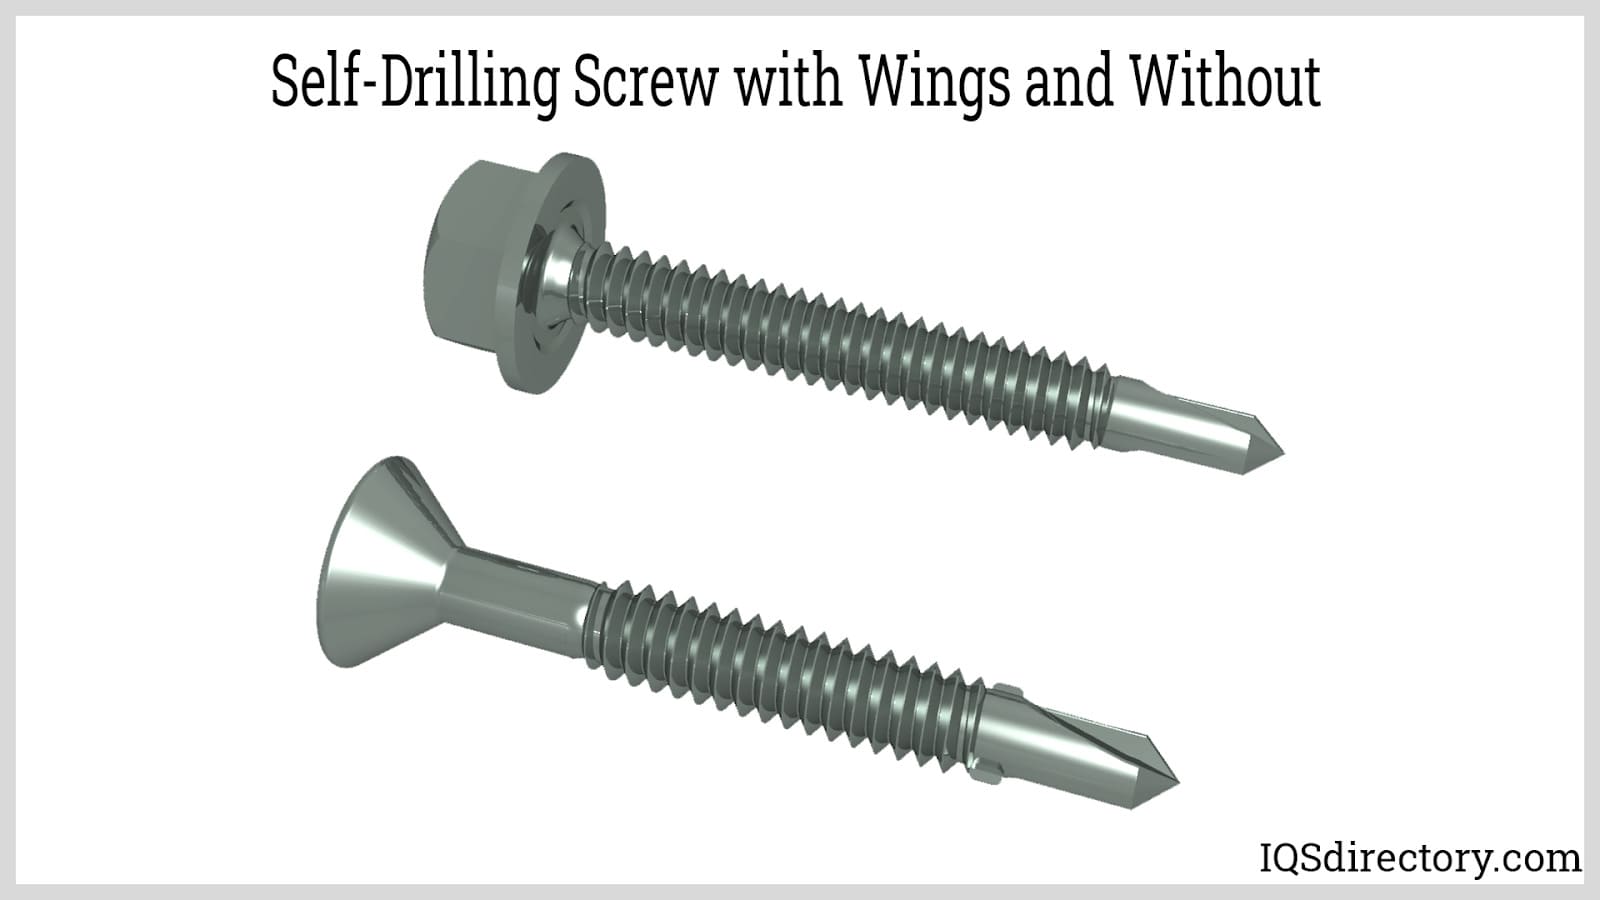 Self-Drilling Screw with Wings and Without